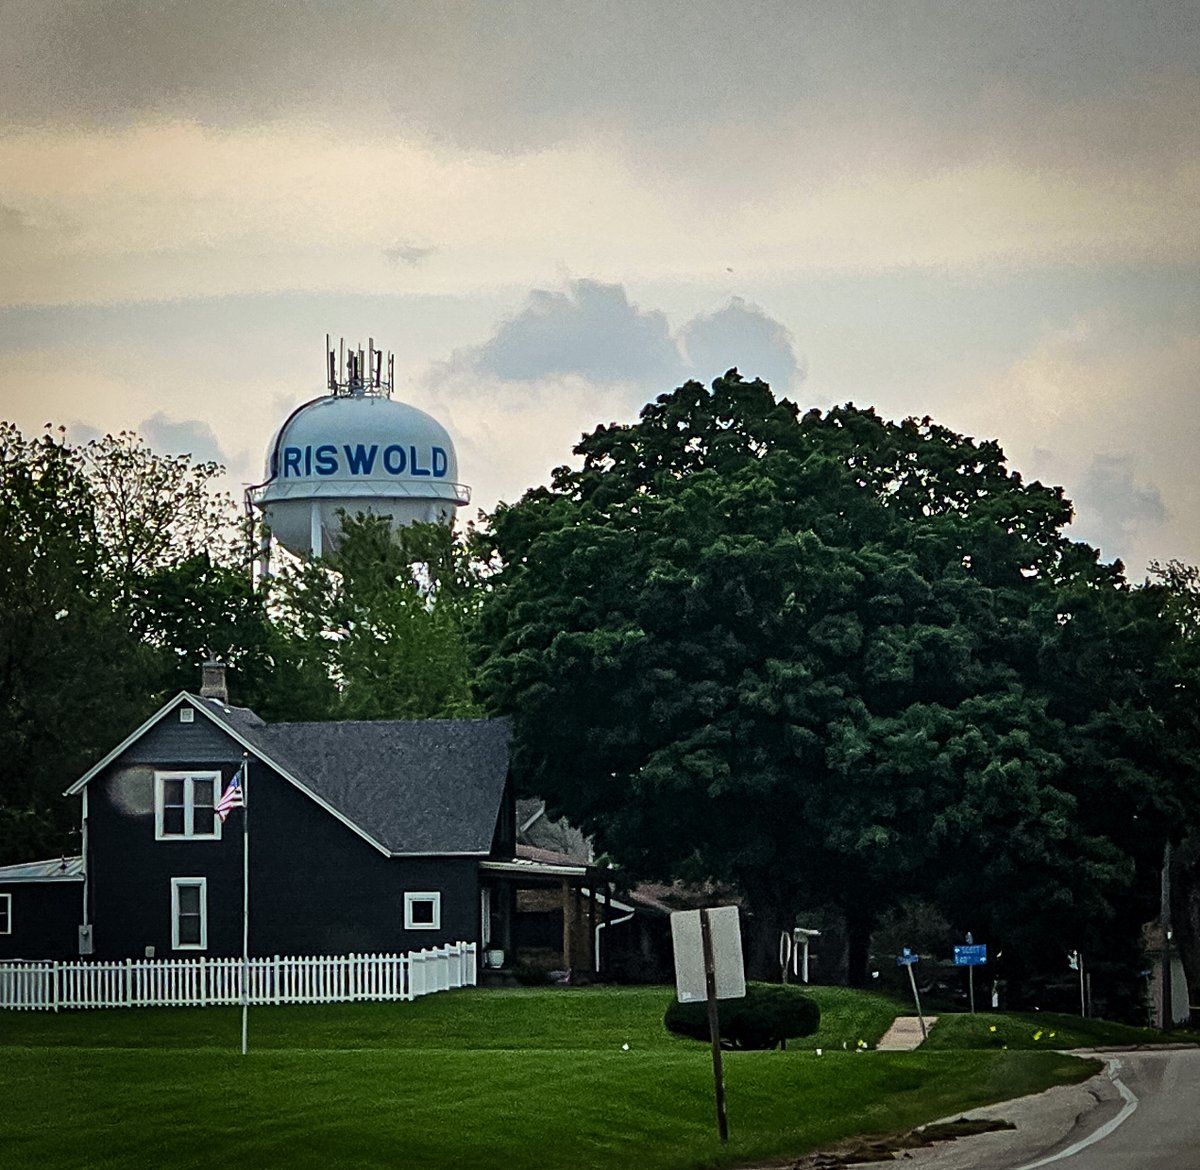 Told myself I was gonna start taking more water tower pics as that is seems to mark a city and make you remember it wherever we go.  Also more odd and end pics of certain shots I see to take. We go through so many places you wouldn't just go to.. #TravelInspiration #tornado